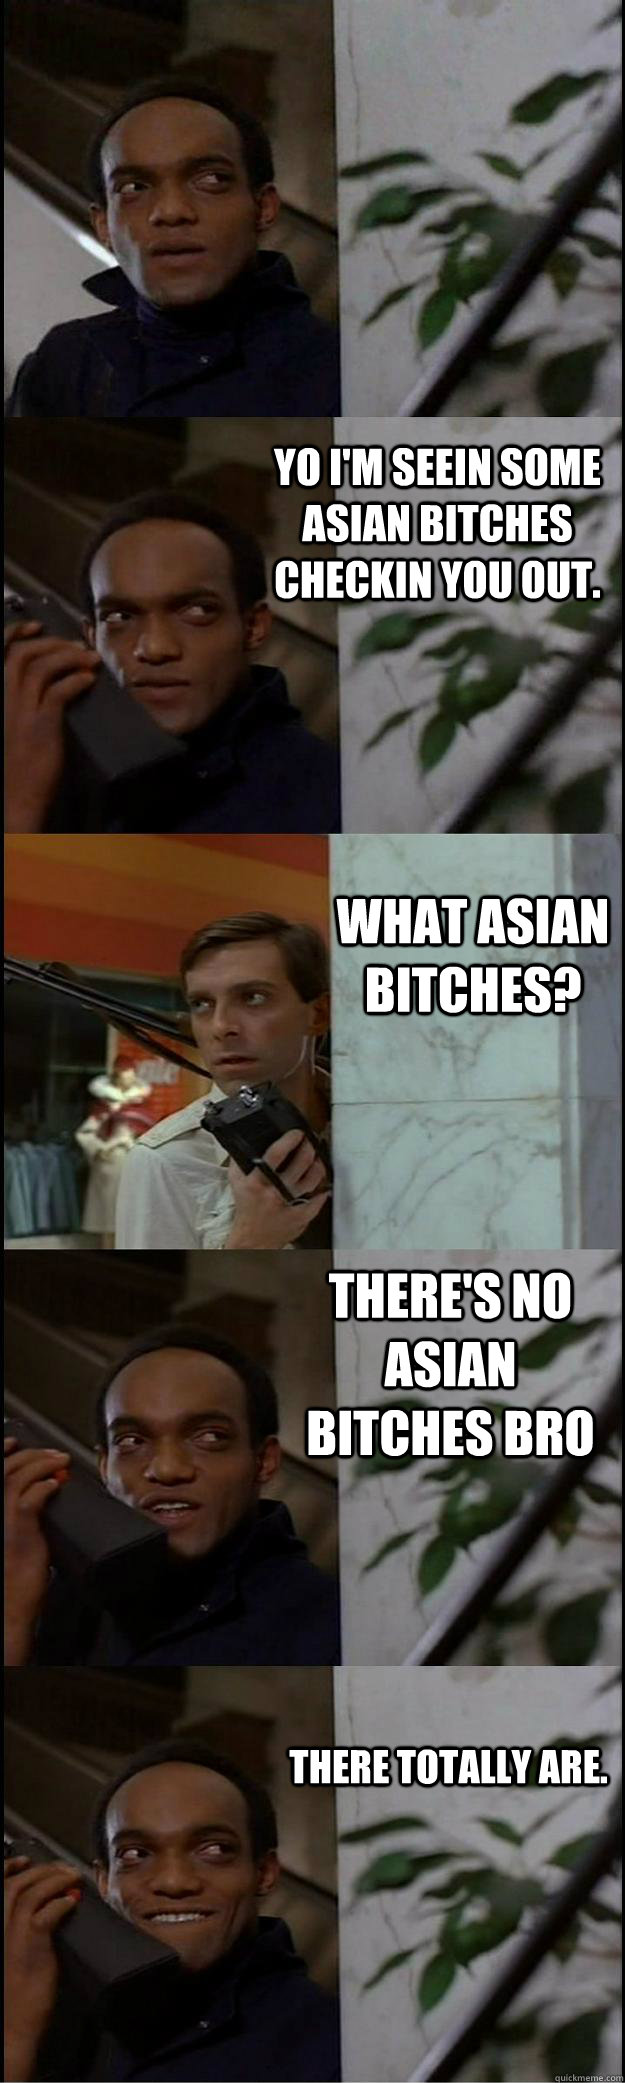 Yo I'm seein some Asian Bitches checkin you out. What asian bitches? There's no asian bitches bro There totally are.  Dawn of the Dead